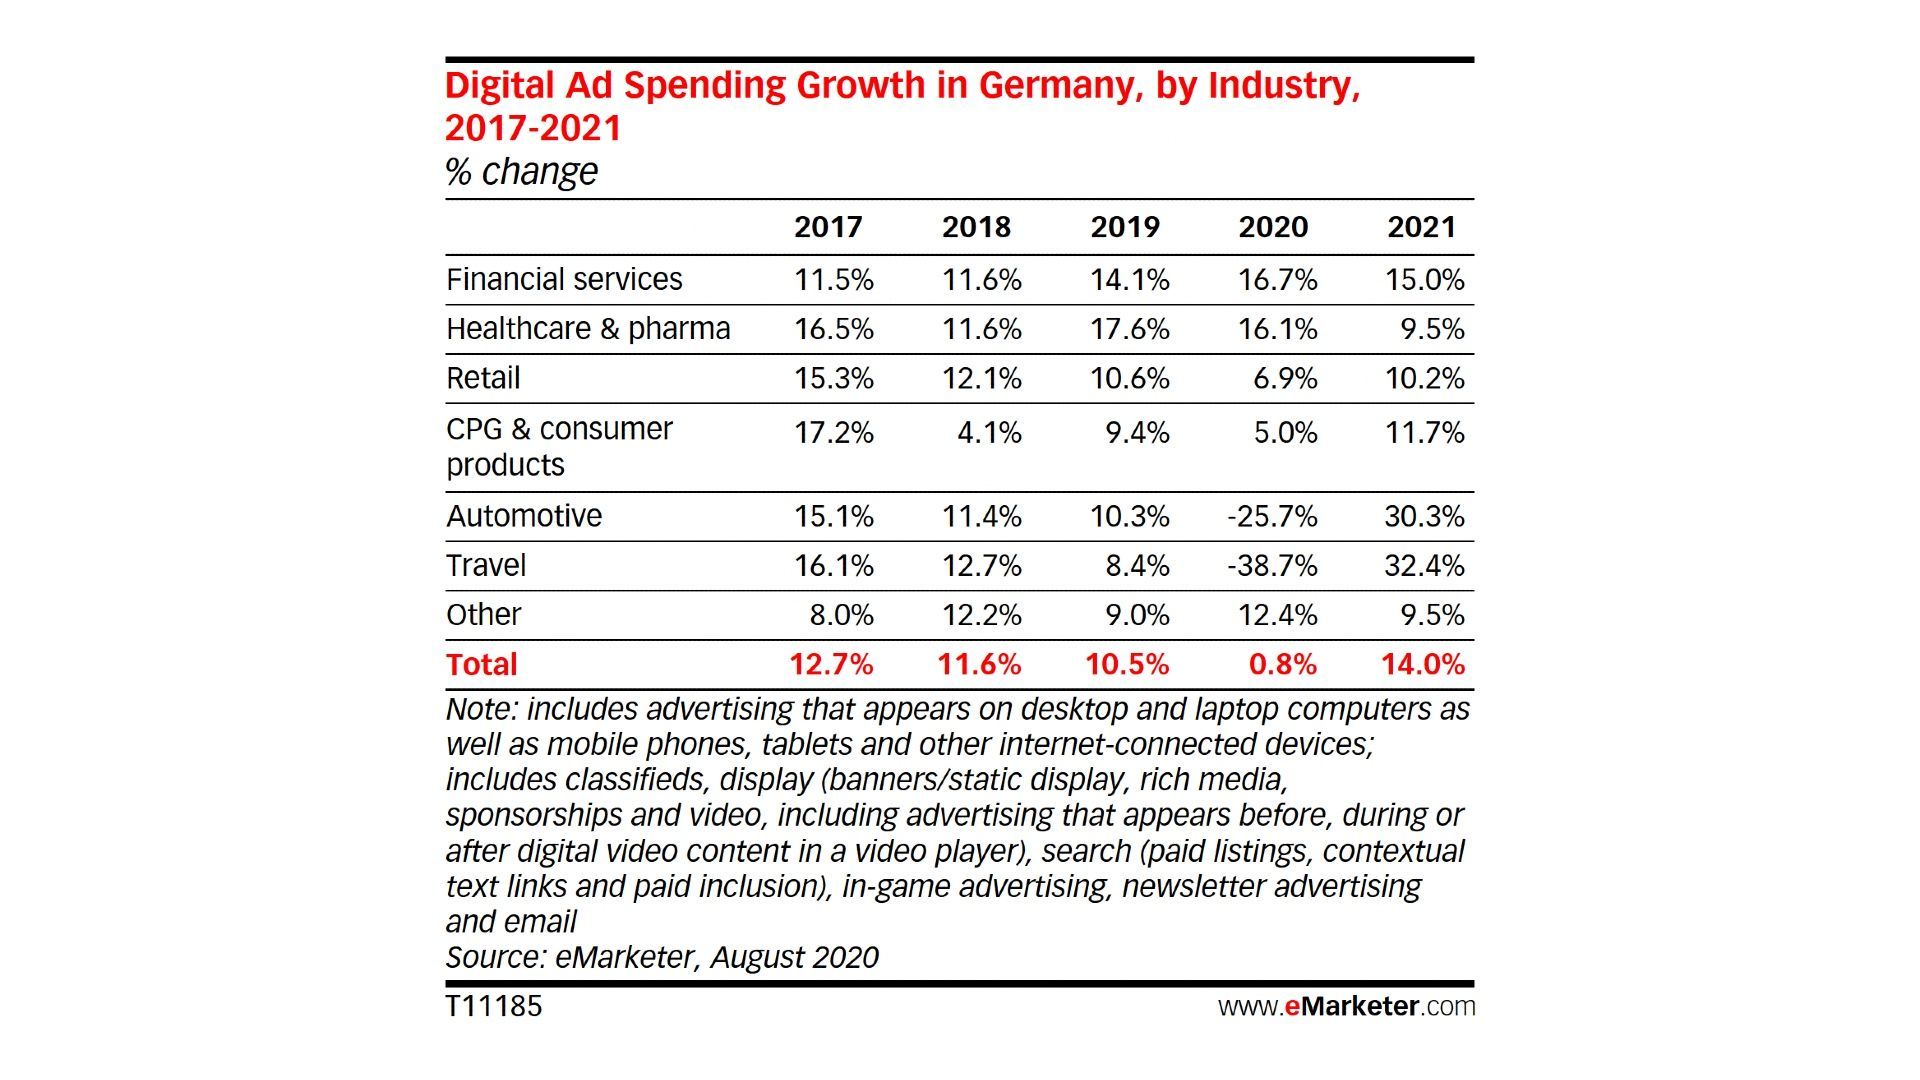 Germany's digital ad spend growth slows down due to travel and auto spend break